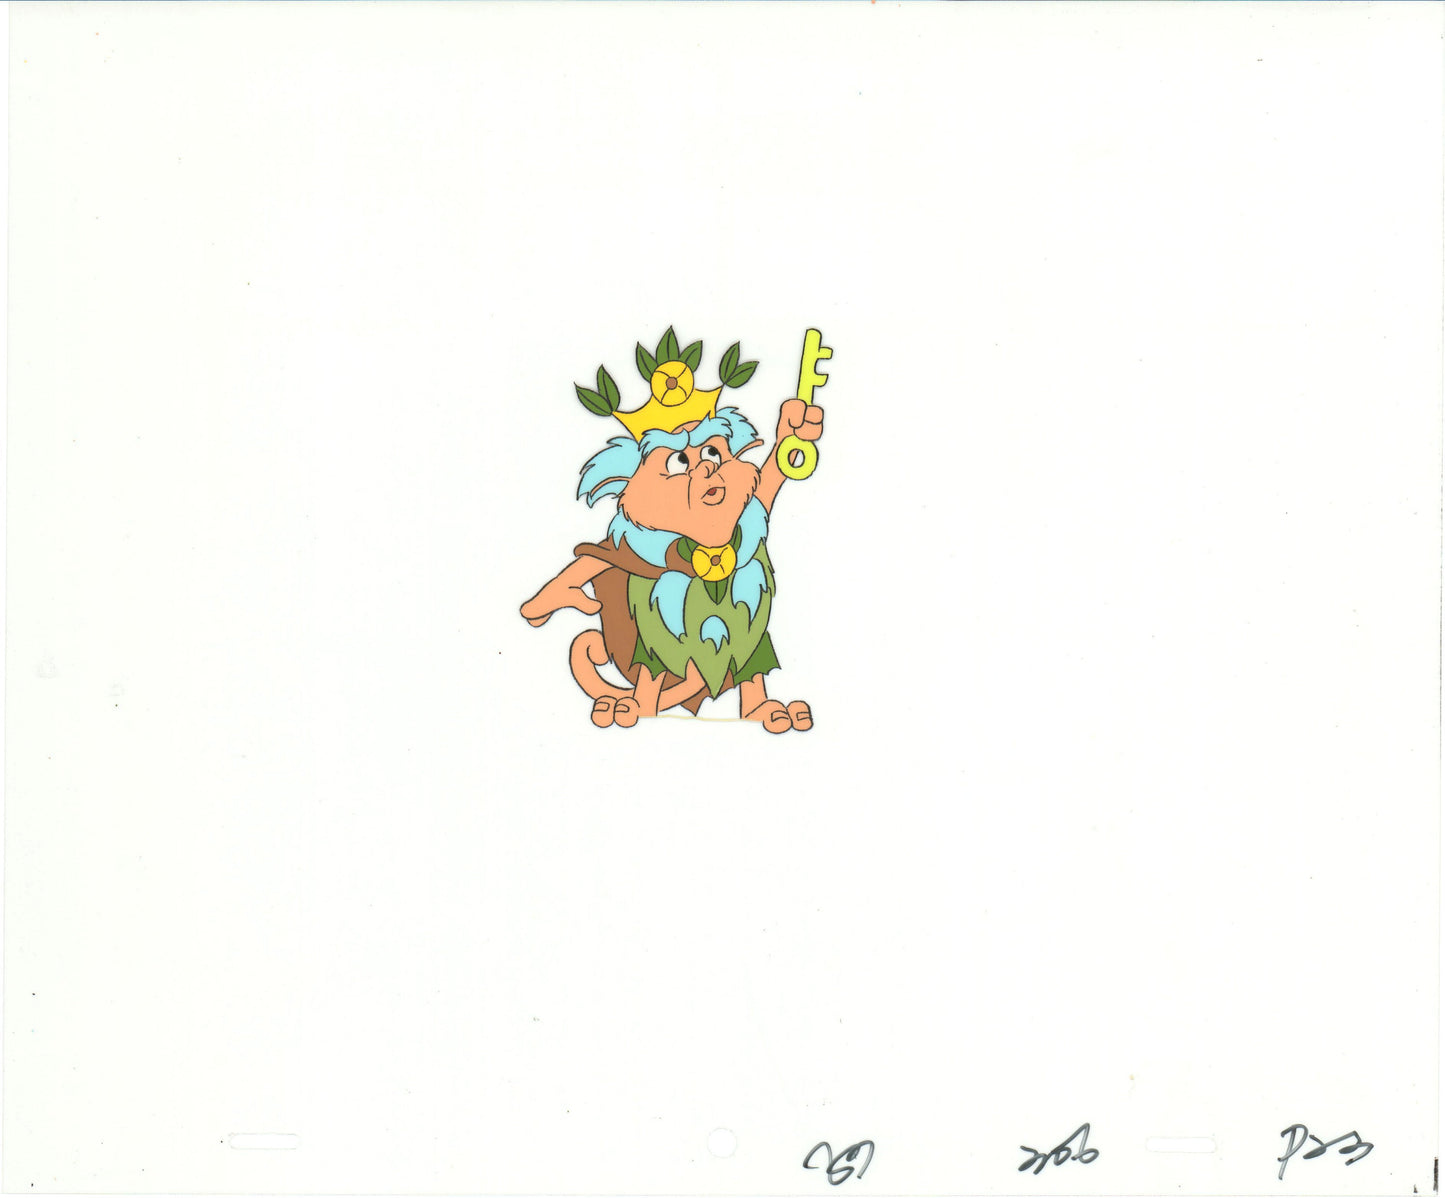 Star Wars: Ewoks Original Production Animation Cel and Drawing from Lucasfilm b5340